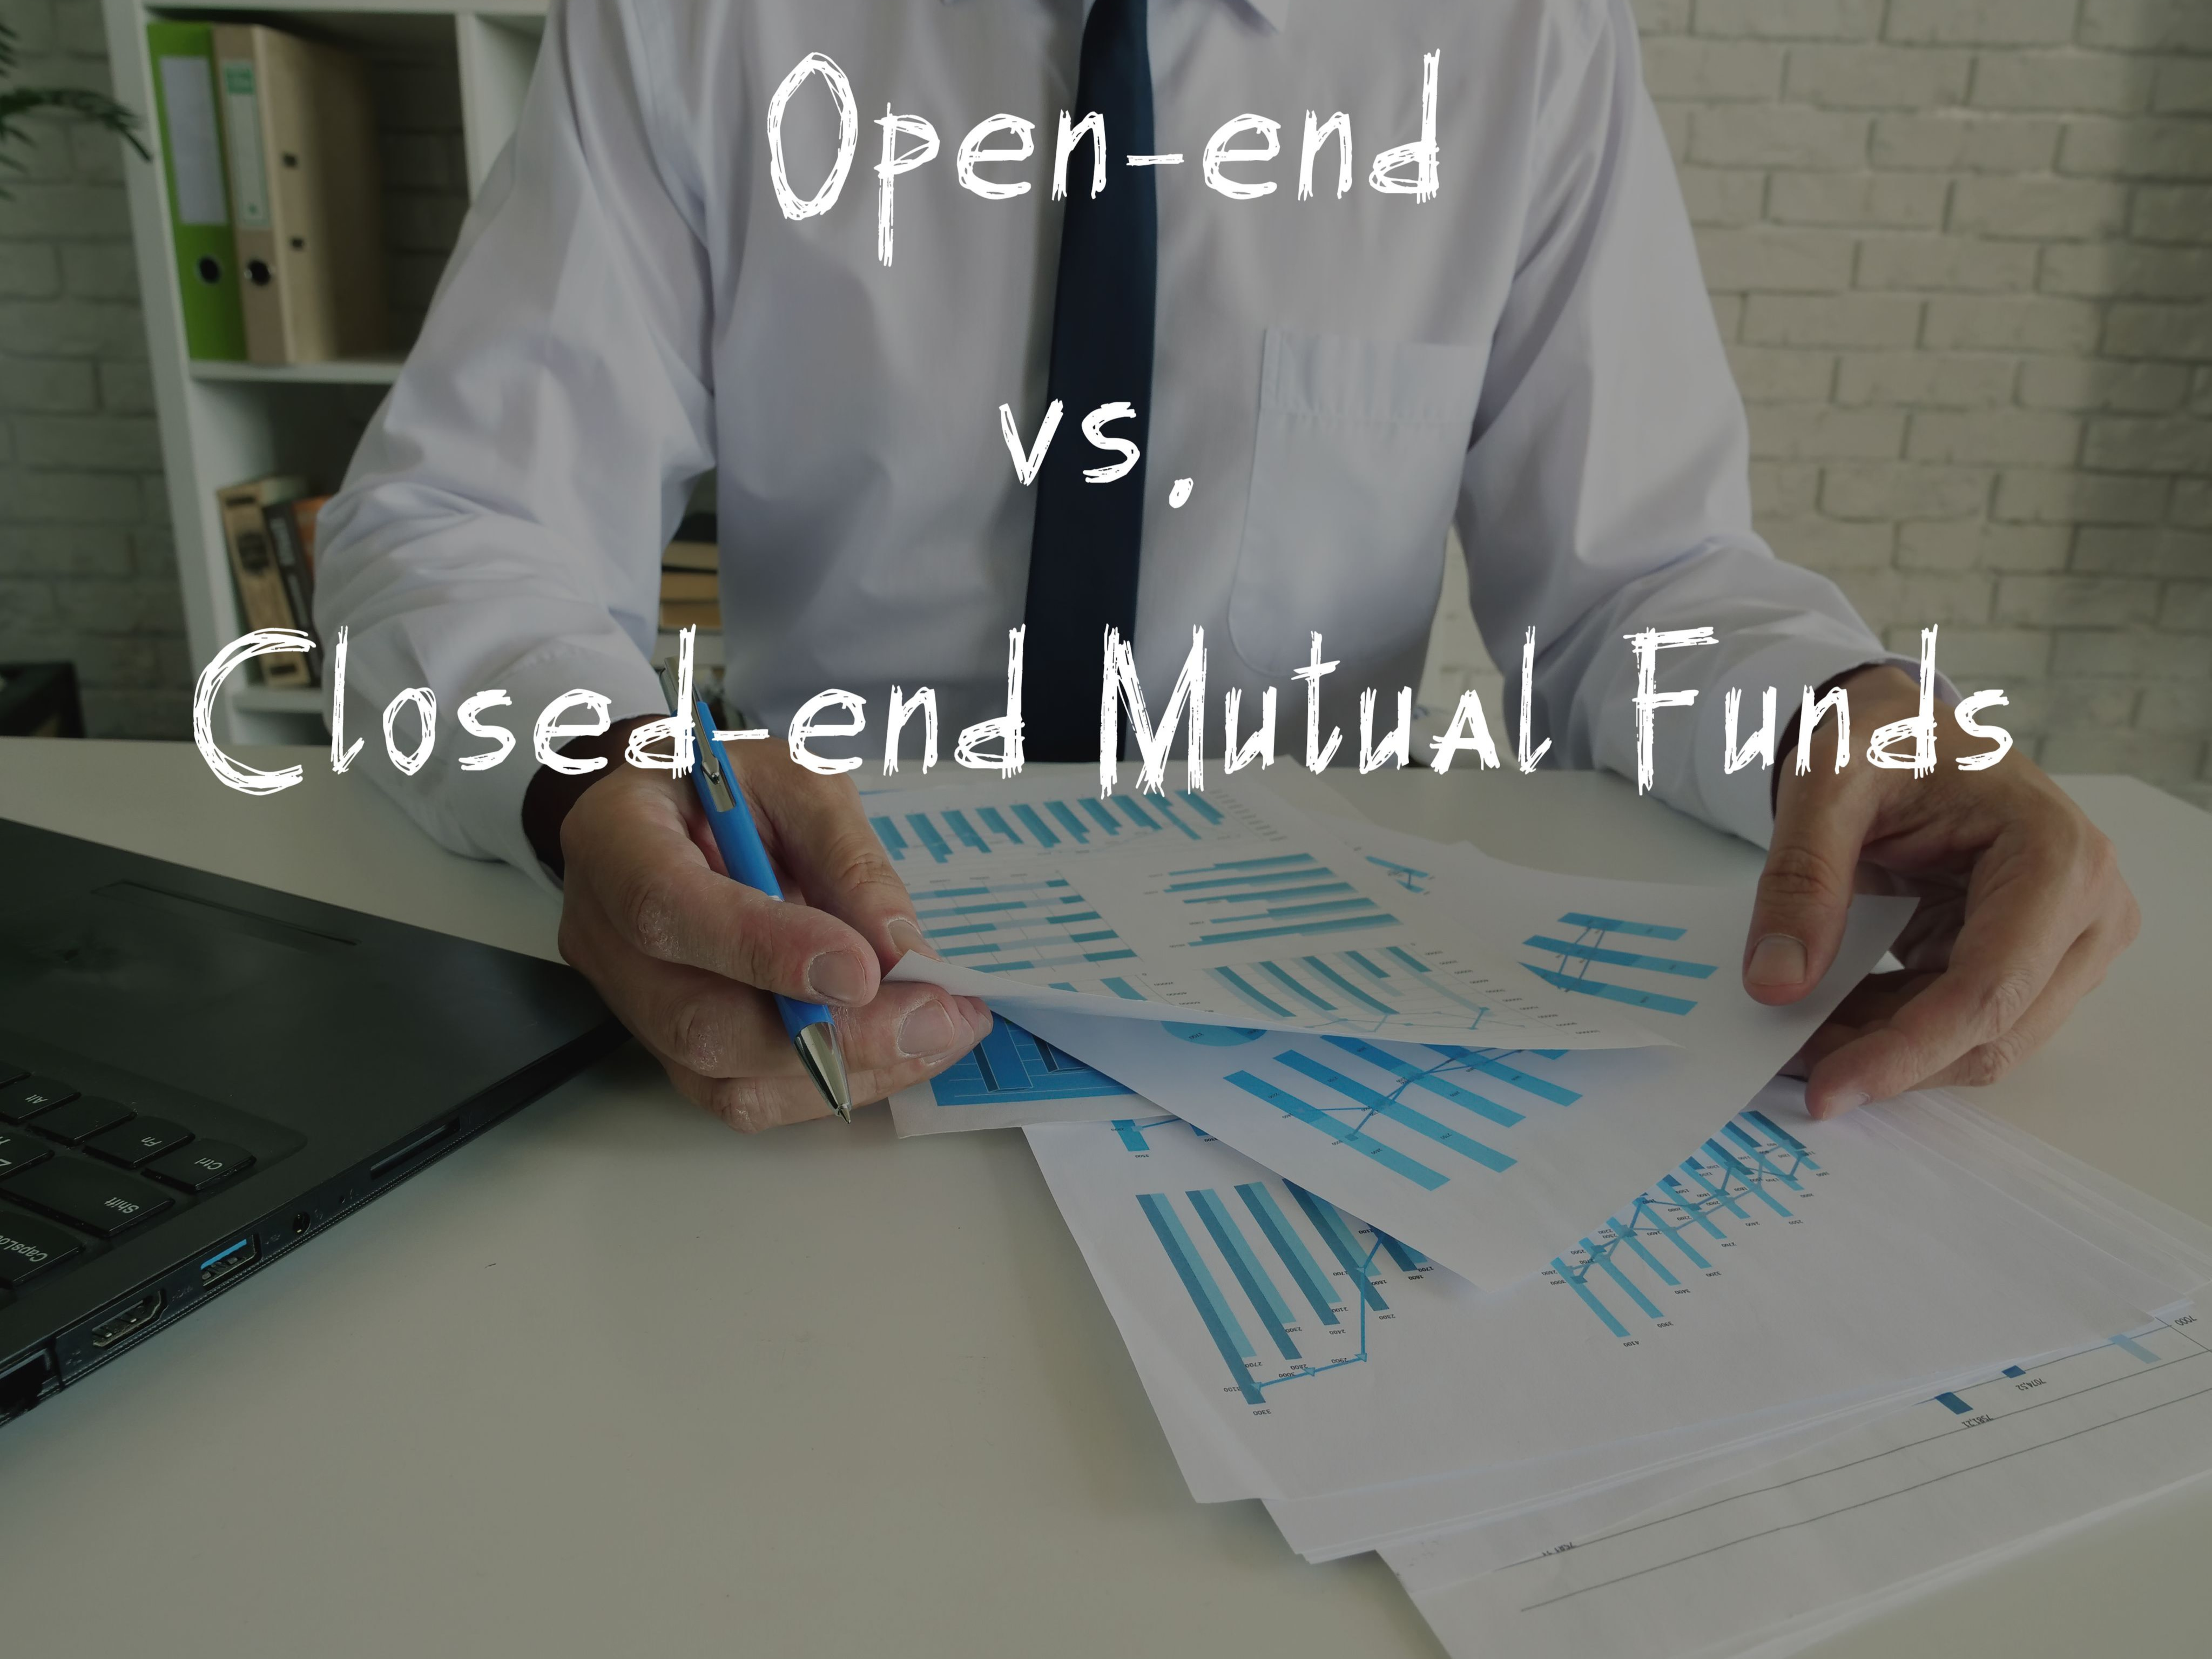 Financial concept meaning Open-end vs. Closed-end Mutual Funds